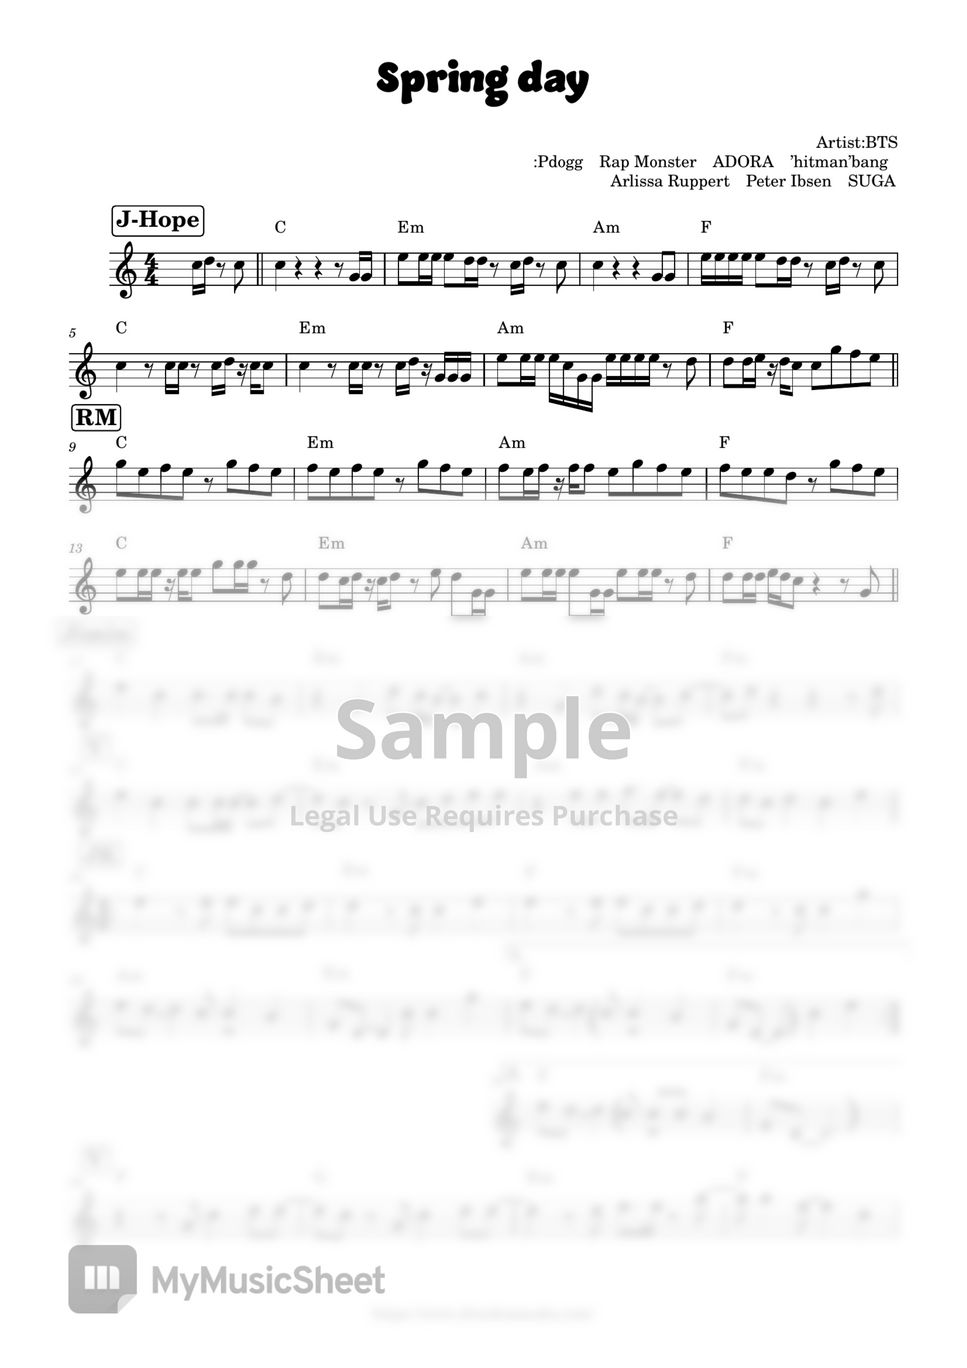 Alto Saxophone sheet music of the day - 1 : r/saxophone